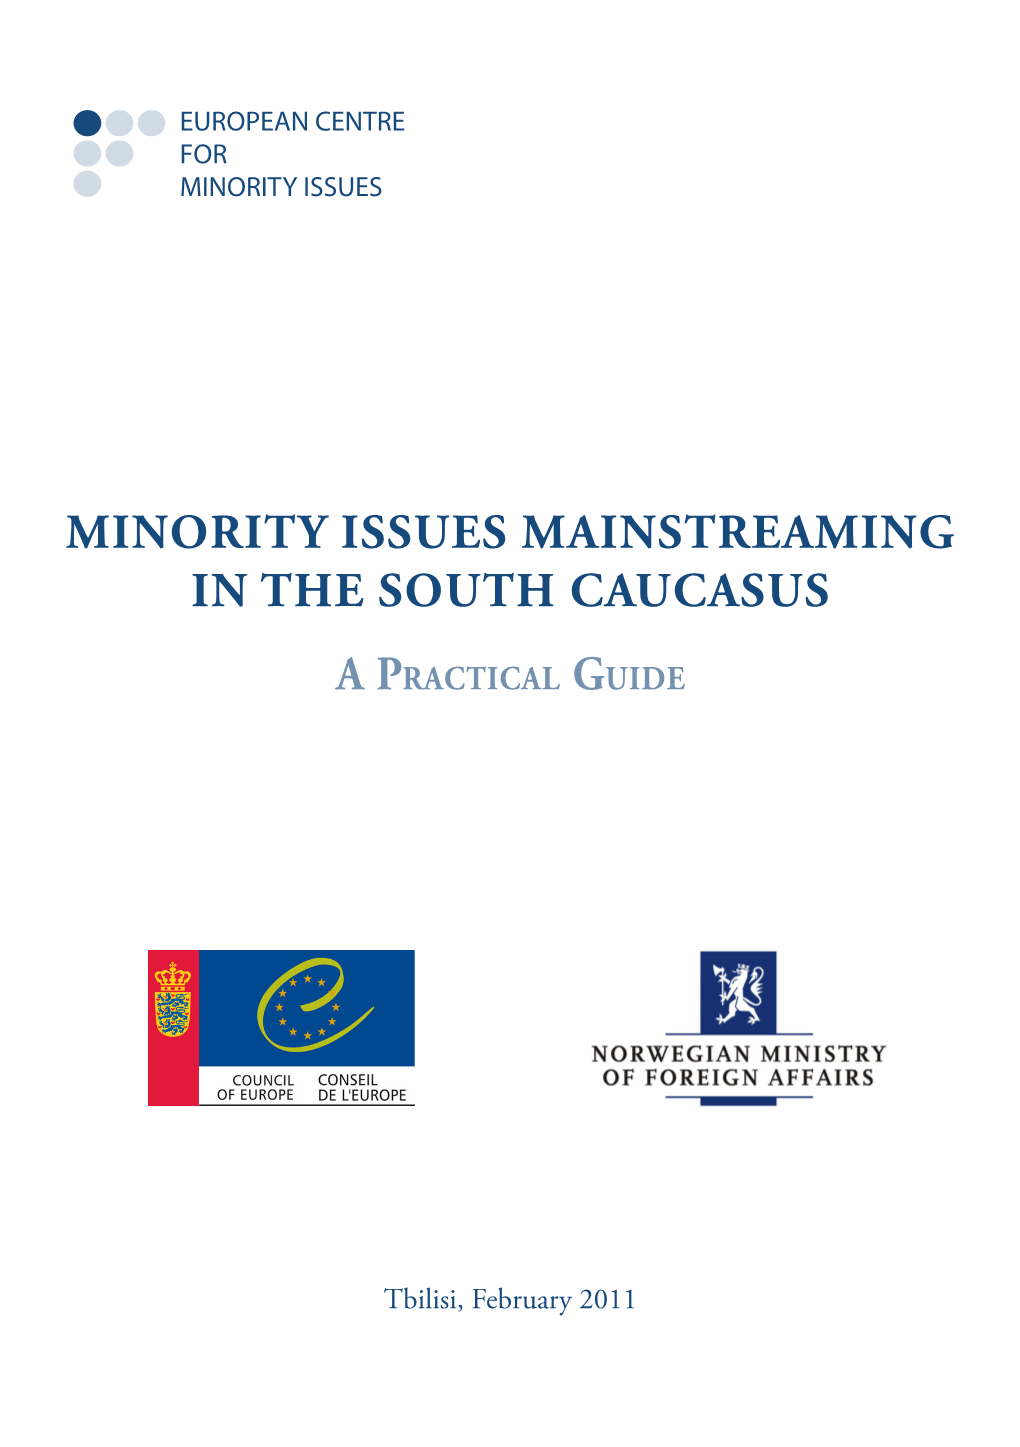 Minority Issues Mainstreaming in the South Caucasus